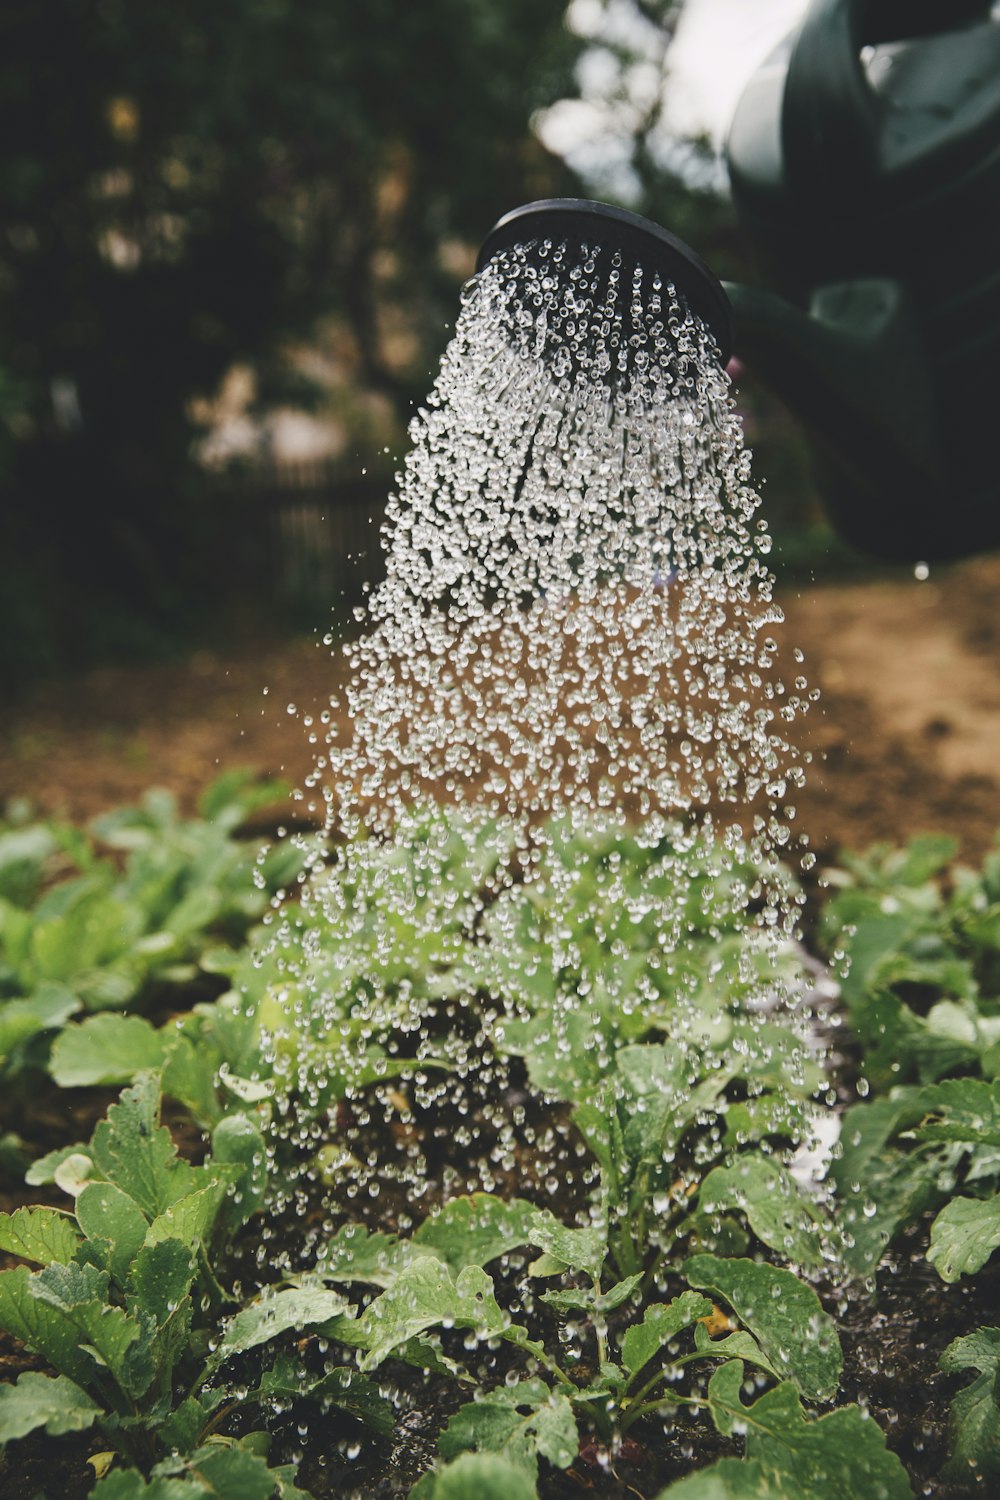 Watering your plant with used water | Photo by Markus Spiske from Unsplash